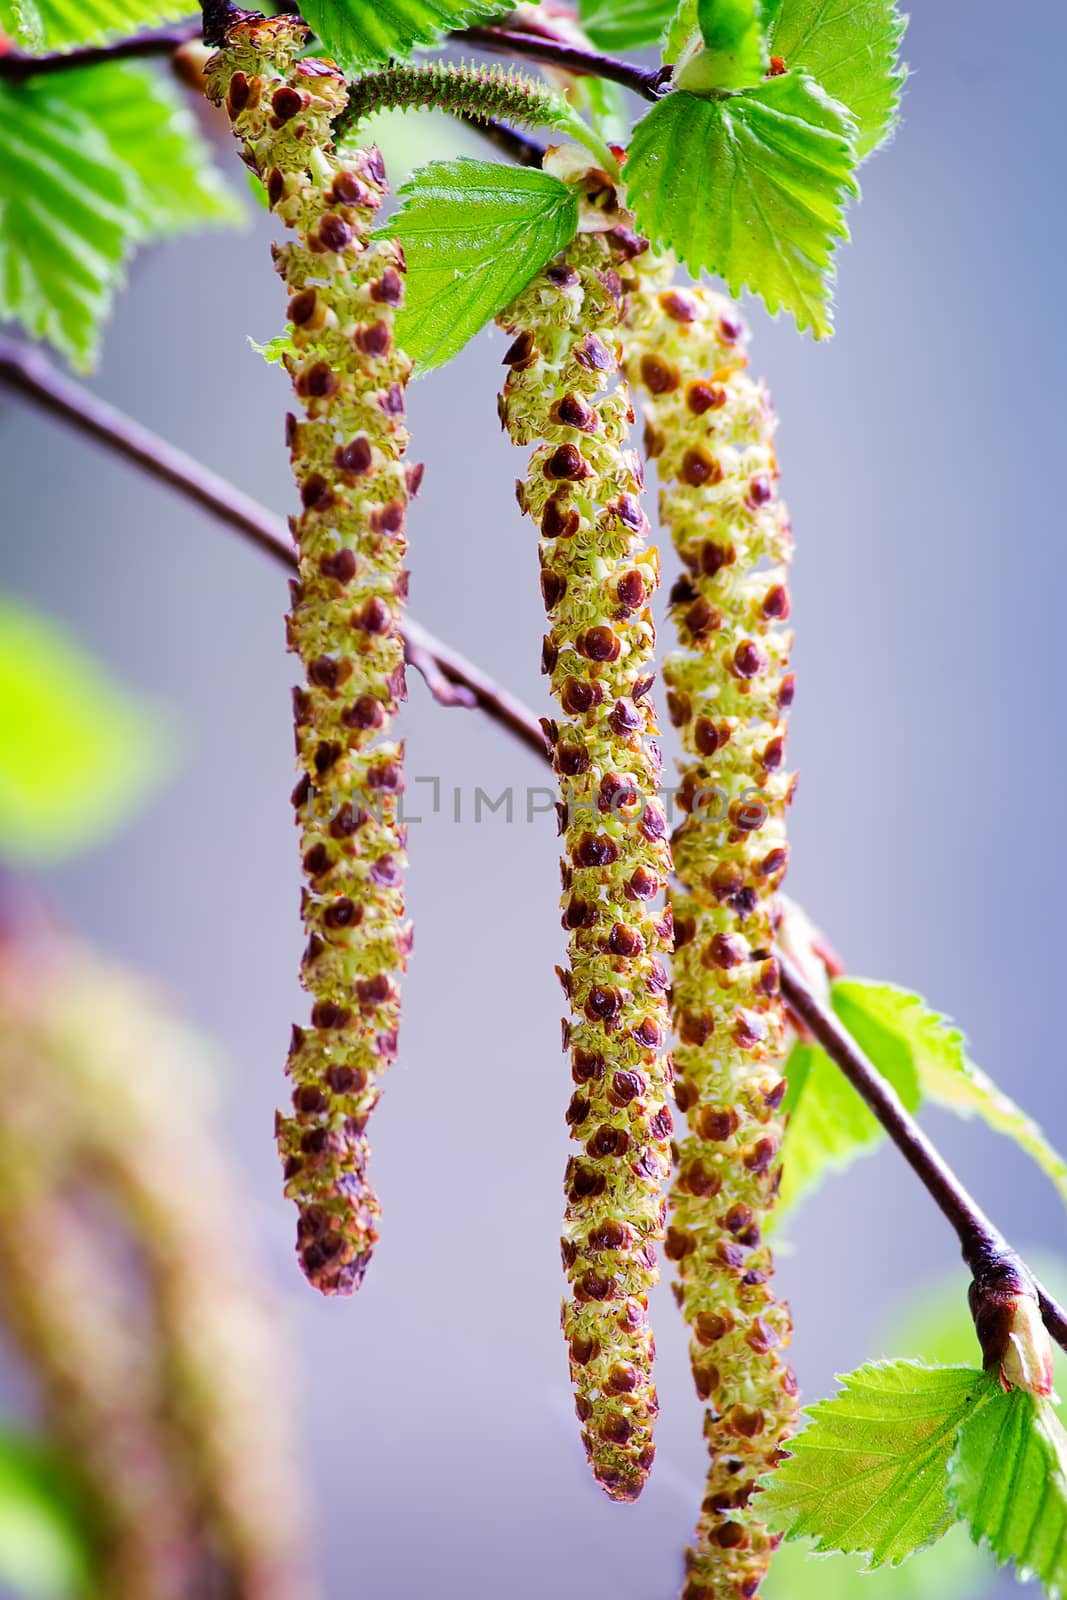 The young shoots of birch with the first green leaves and flowers against the sky. Presents closeup.